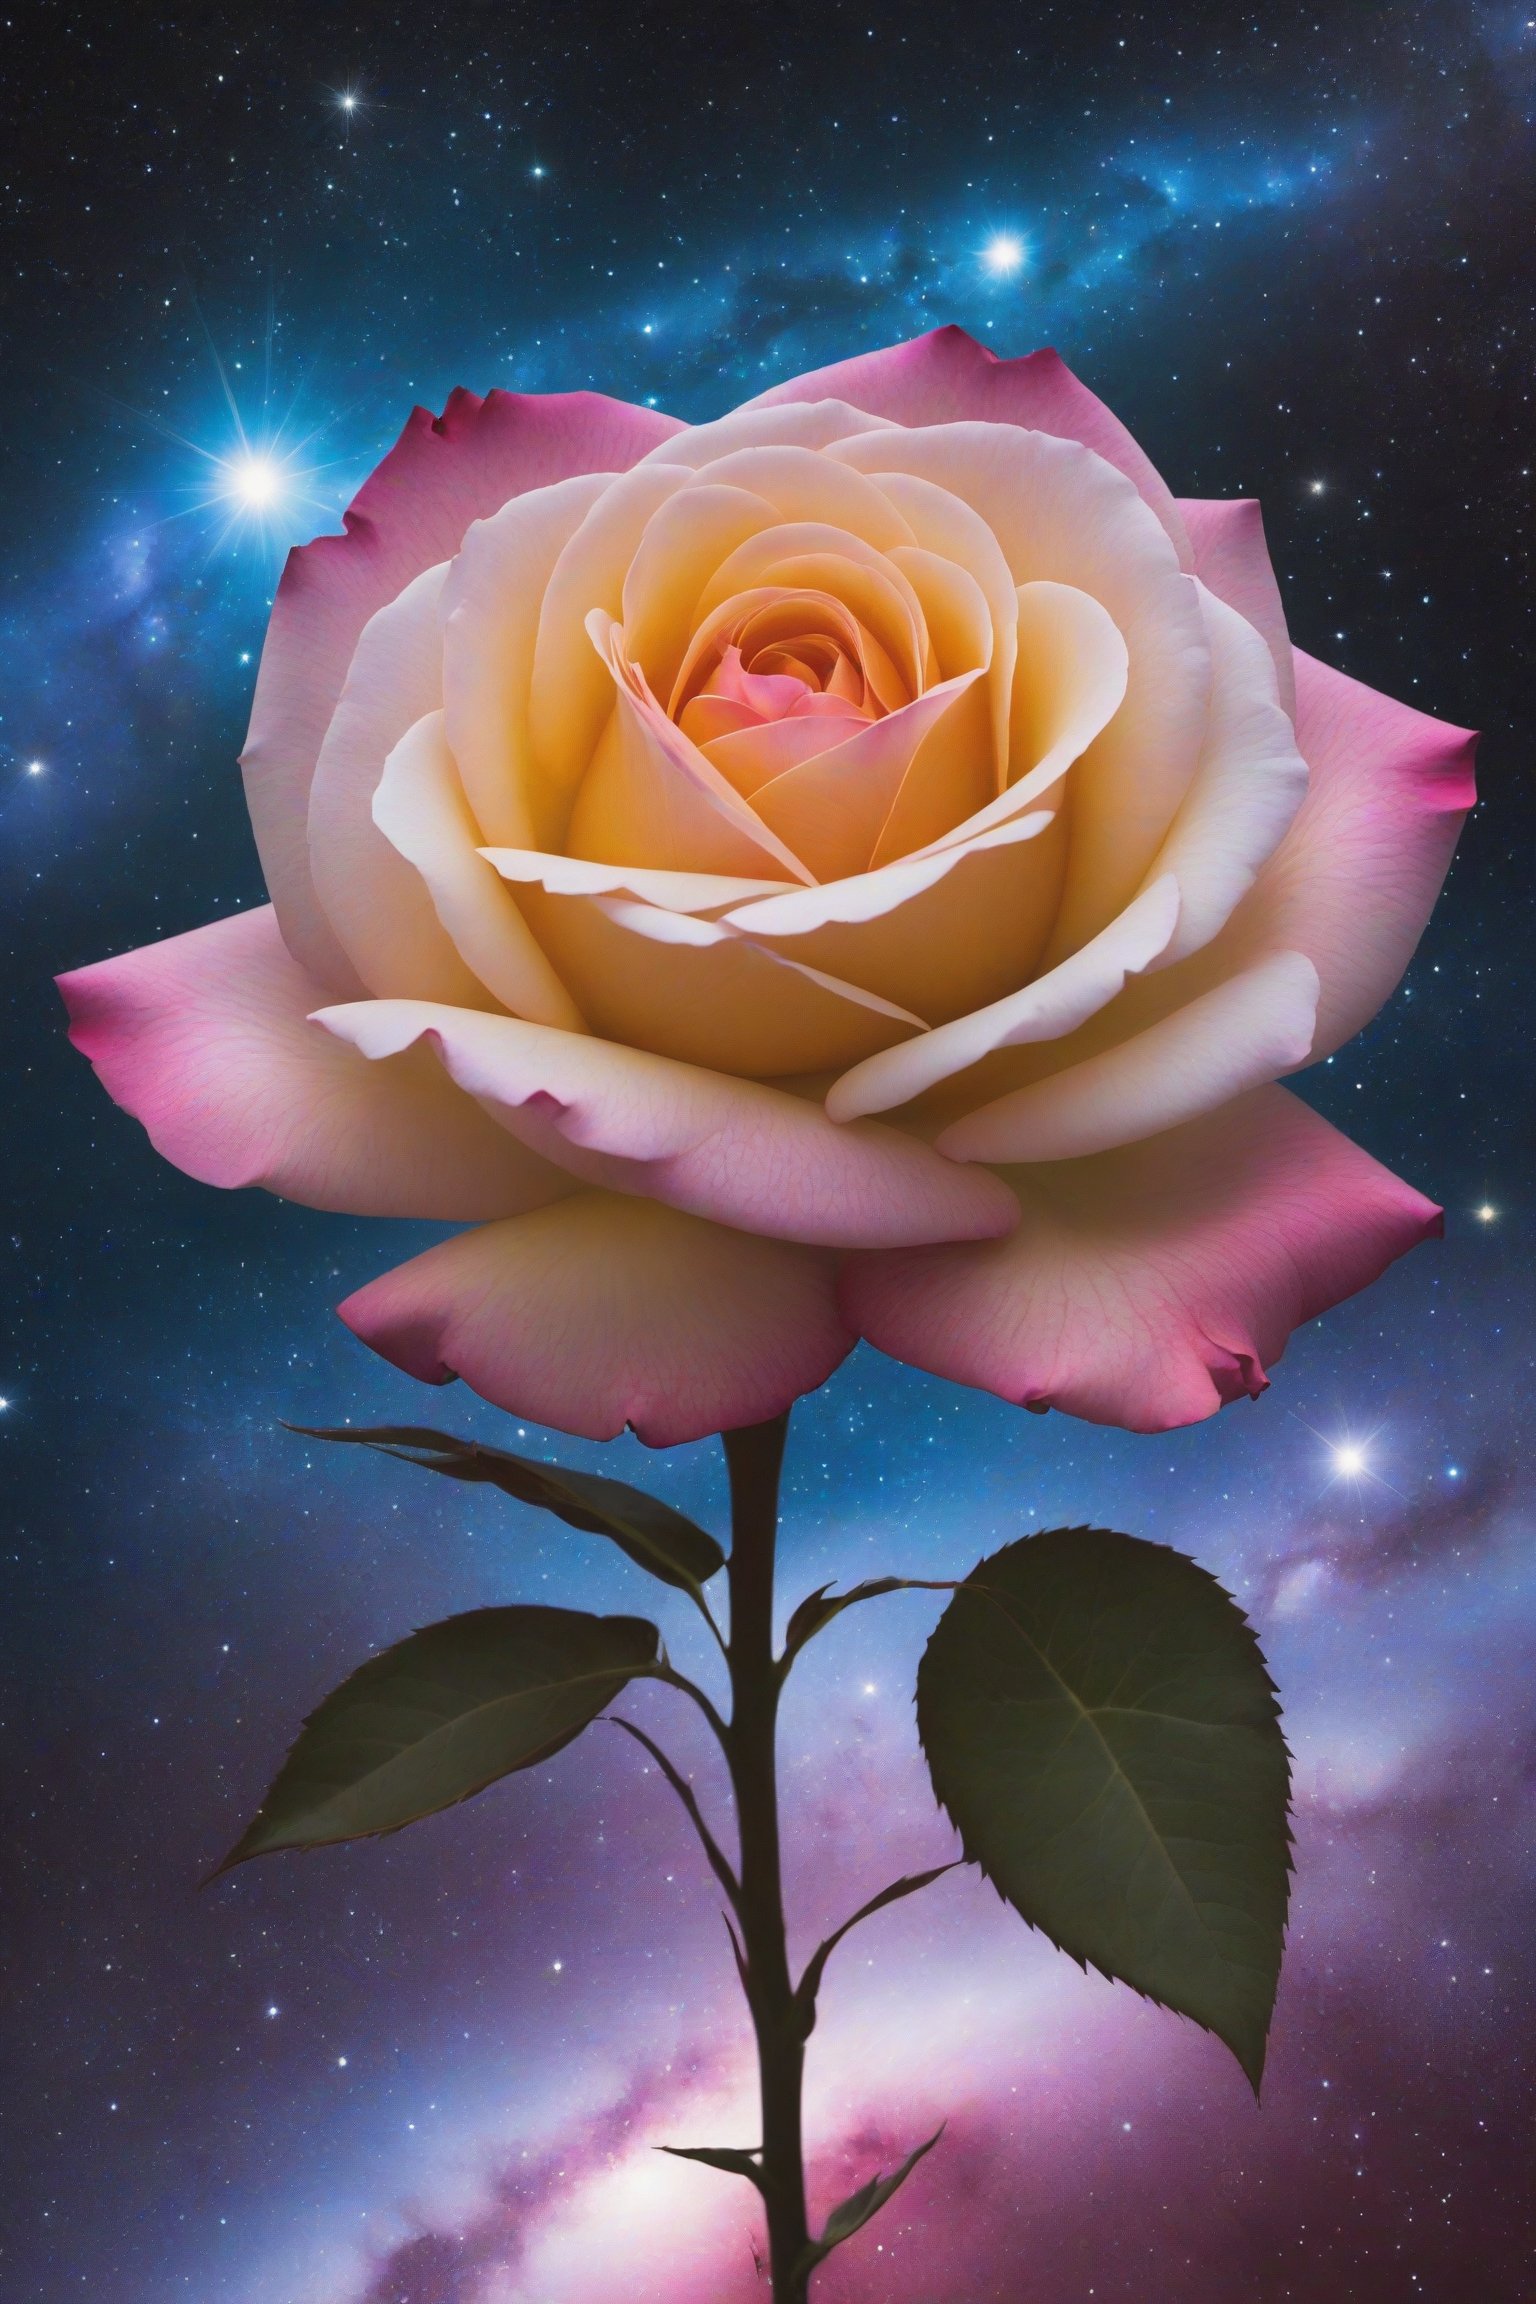 Cosmic Rose of Stellar Secrets: A rose glowing with celestial radiance, each petal revealing a secret of the universe as it moves in harmony with the cycles of the stars.